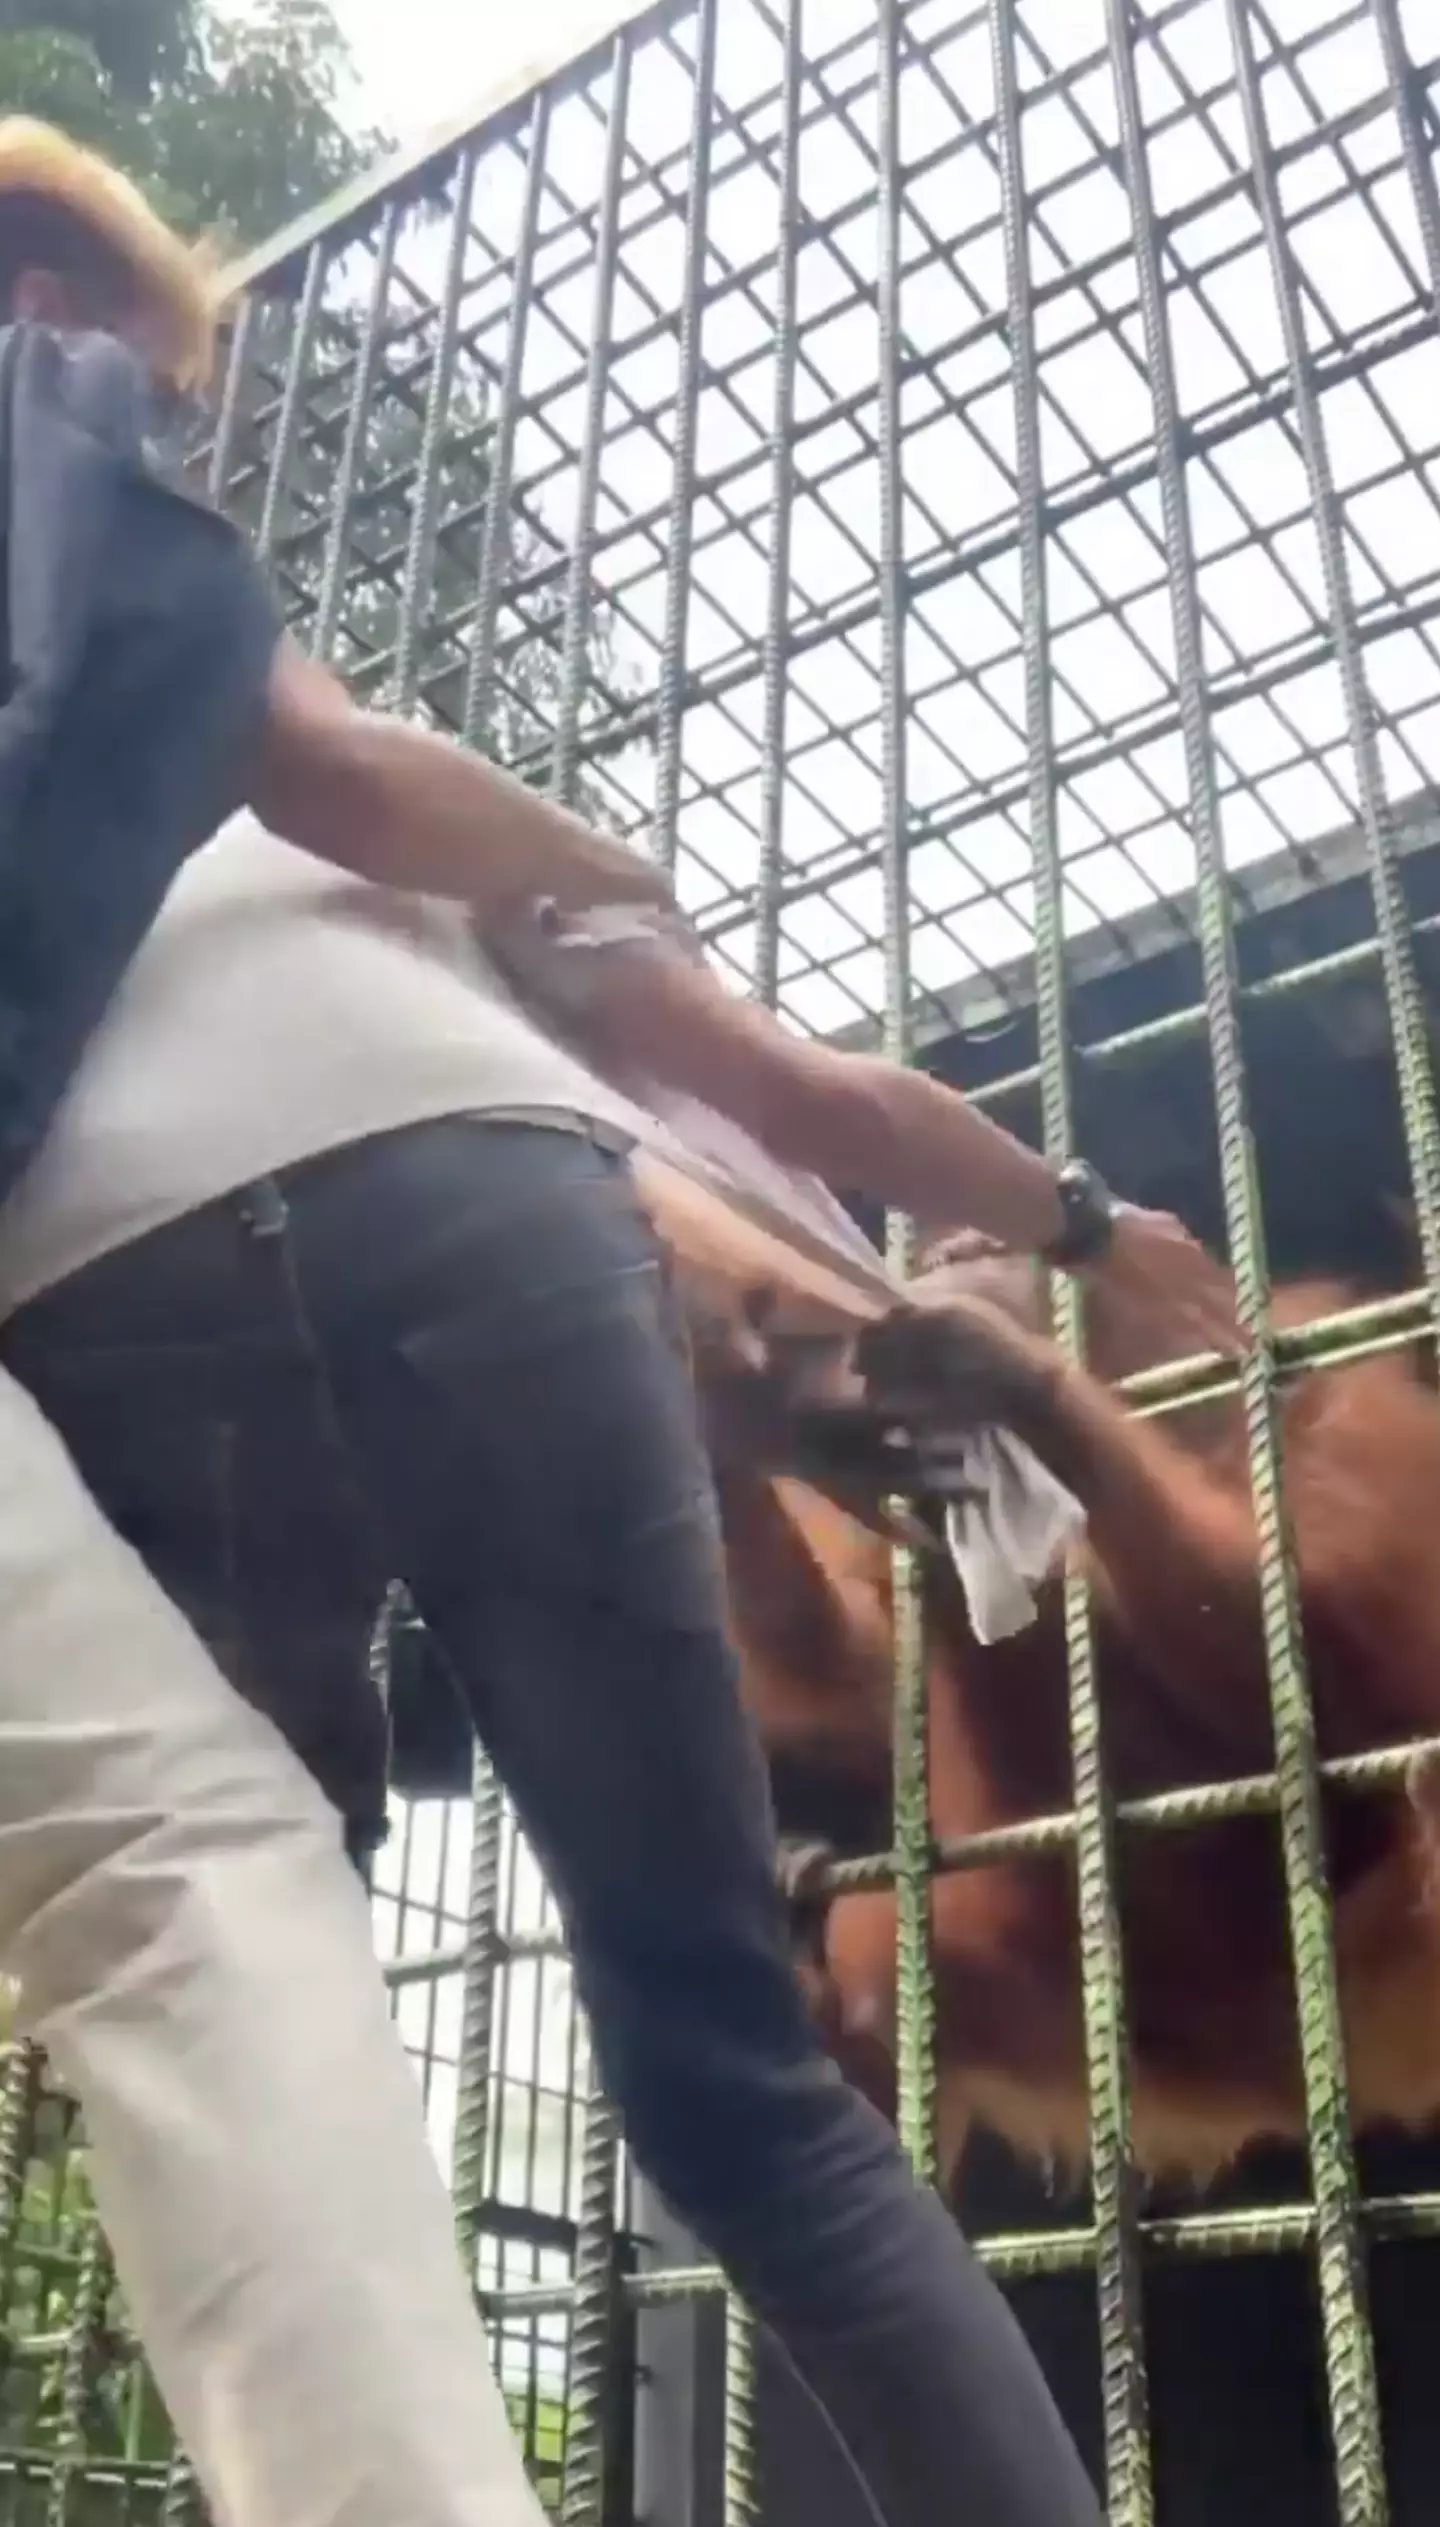 The orangutan grabbed the man and refused to let go.